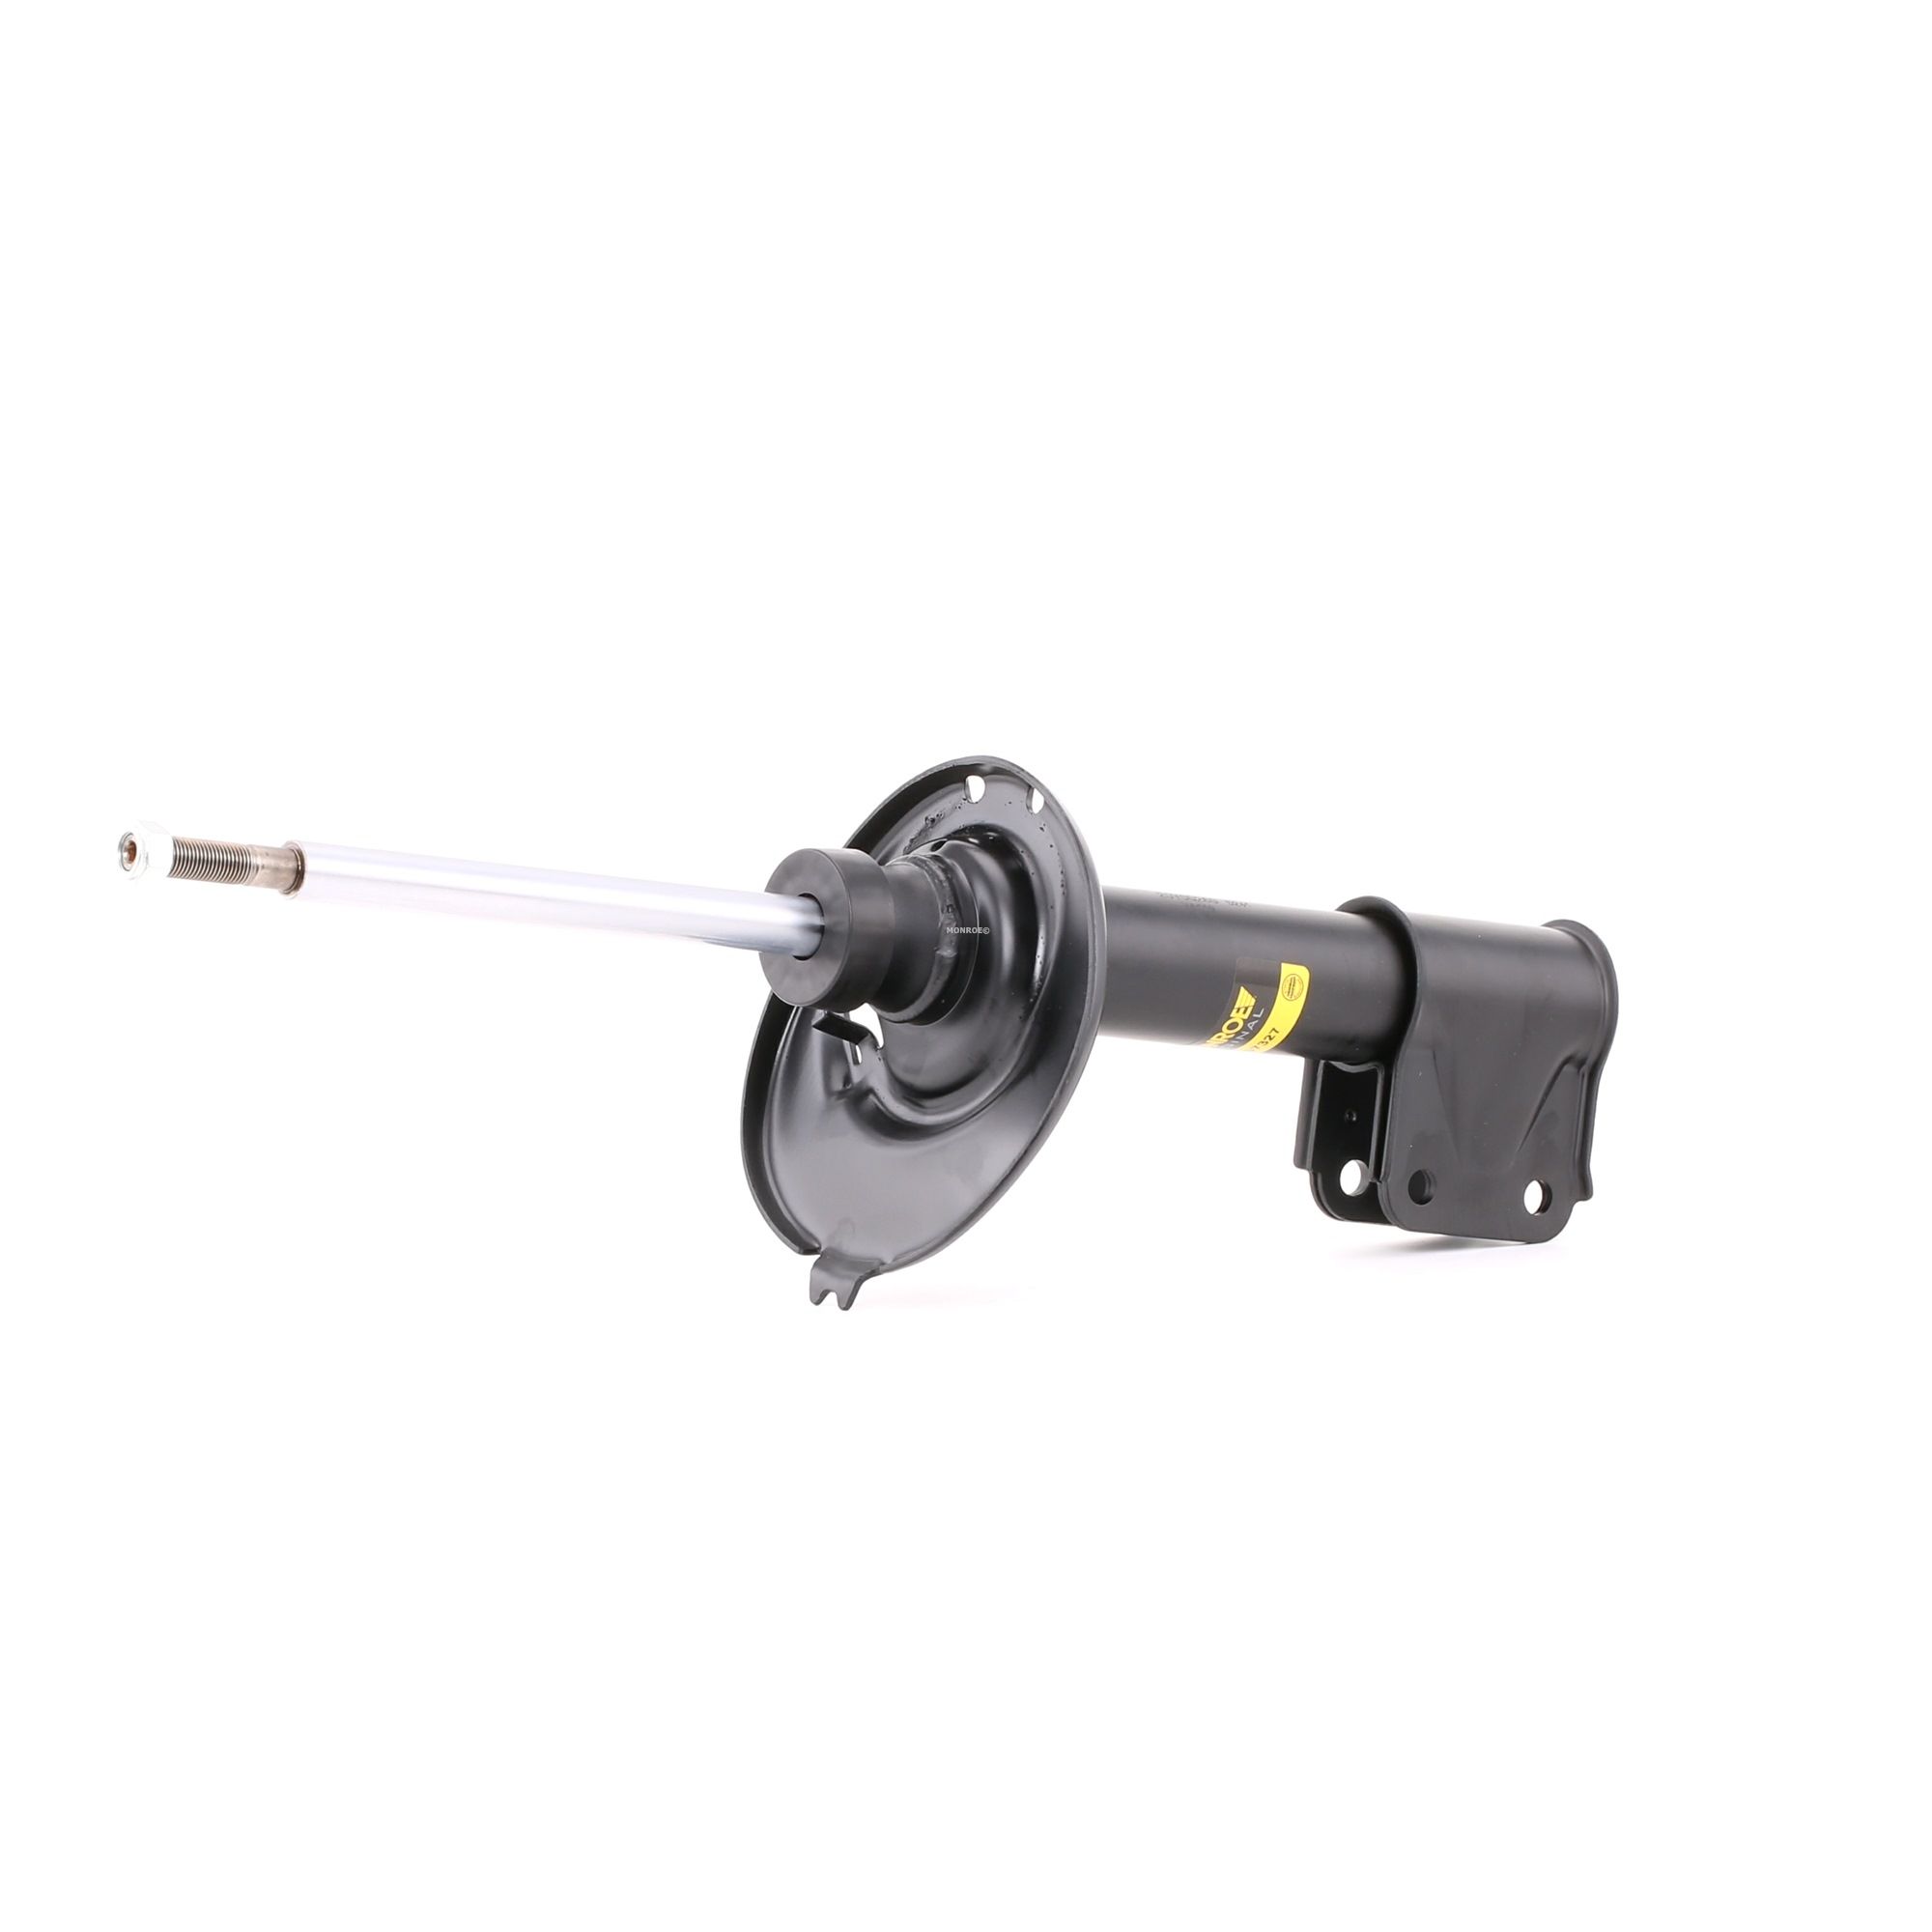 MONROE G7327 Shock absorber Gas Pressure, Twin-Tube, Suspension Strut, Top pin, Bottom Clamp